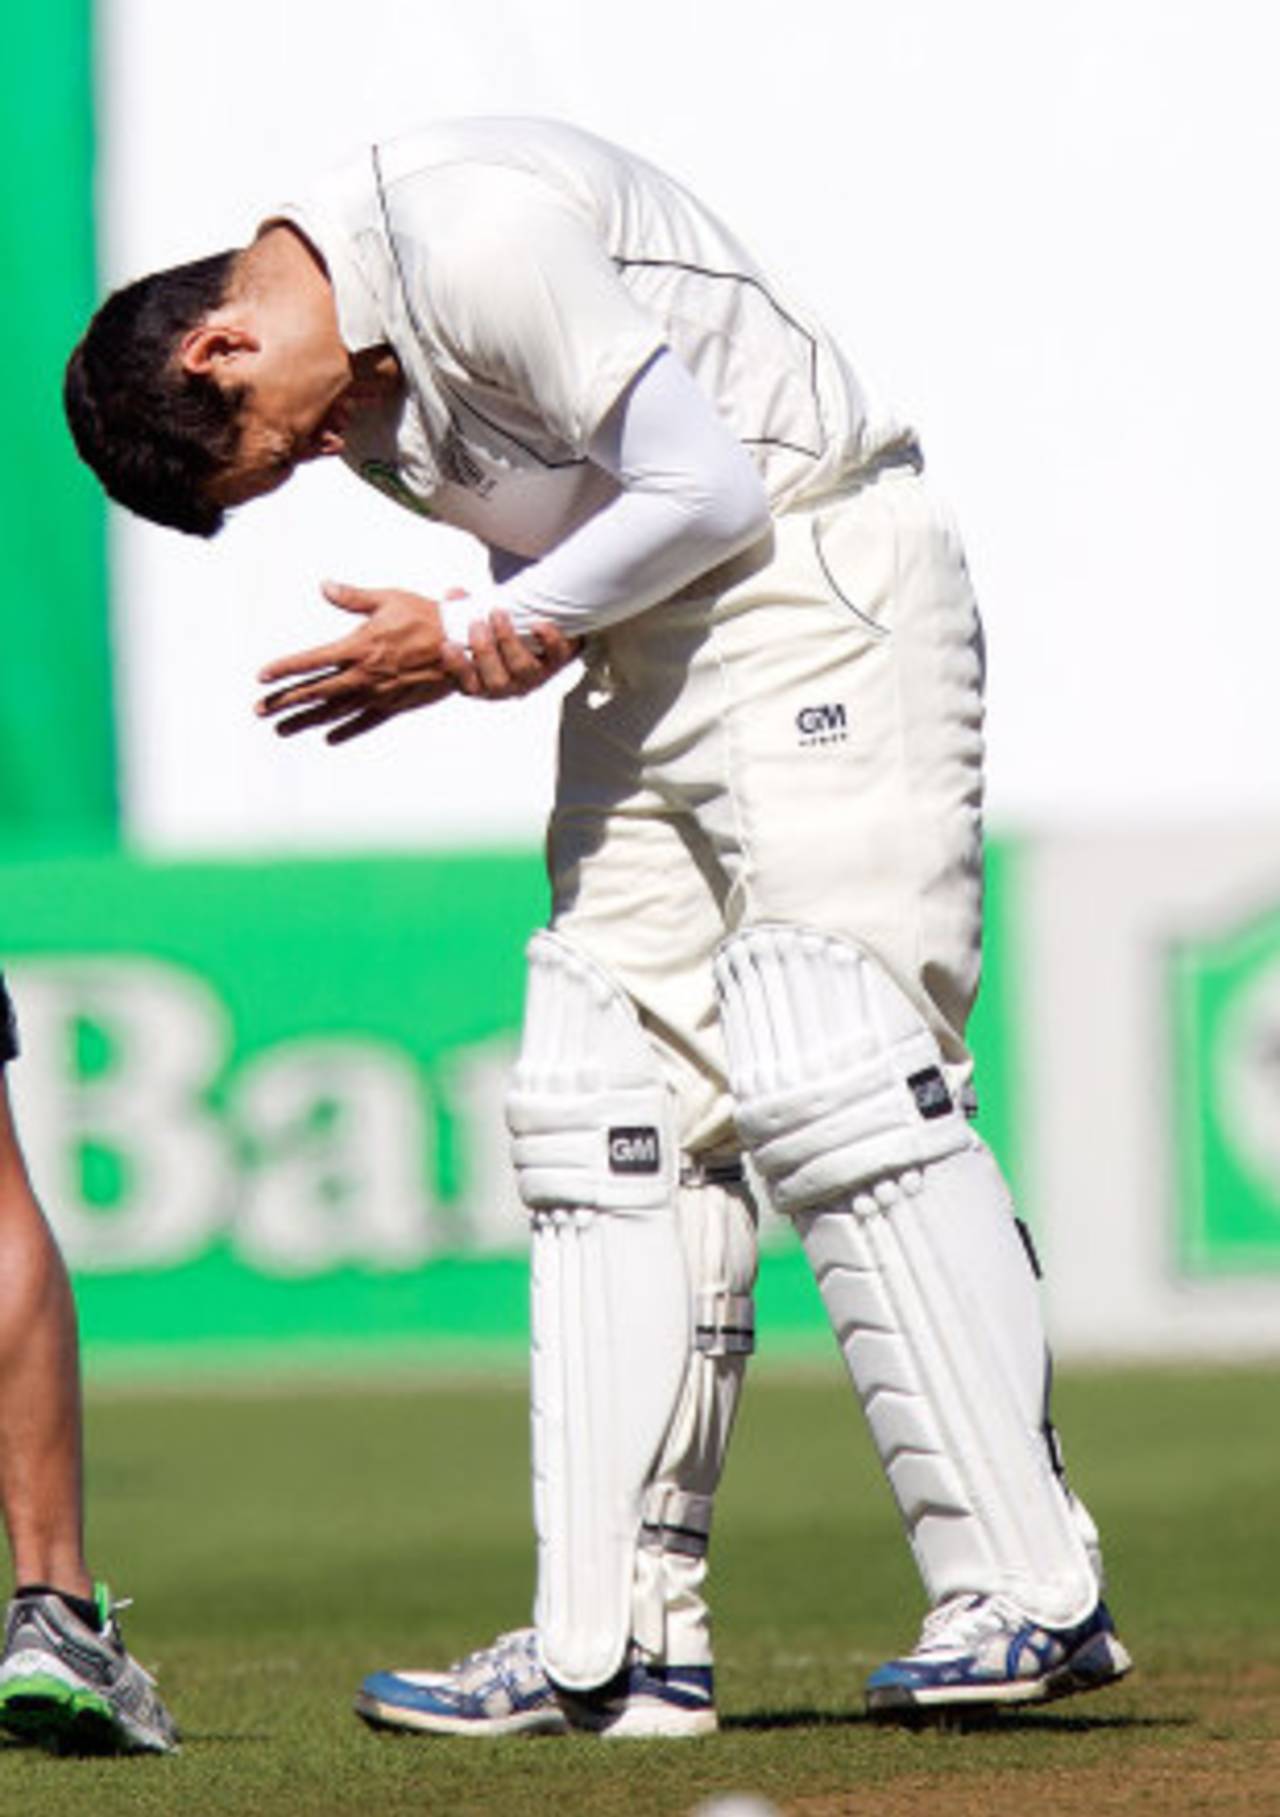 Ross Taylor fractured of the ulna bone of his left forearm after being hit by a Morne Morkel delivery&nbsp;&nbsp;&bull;&nbsp;&nbsp;AFP